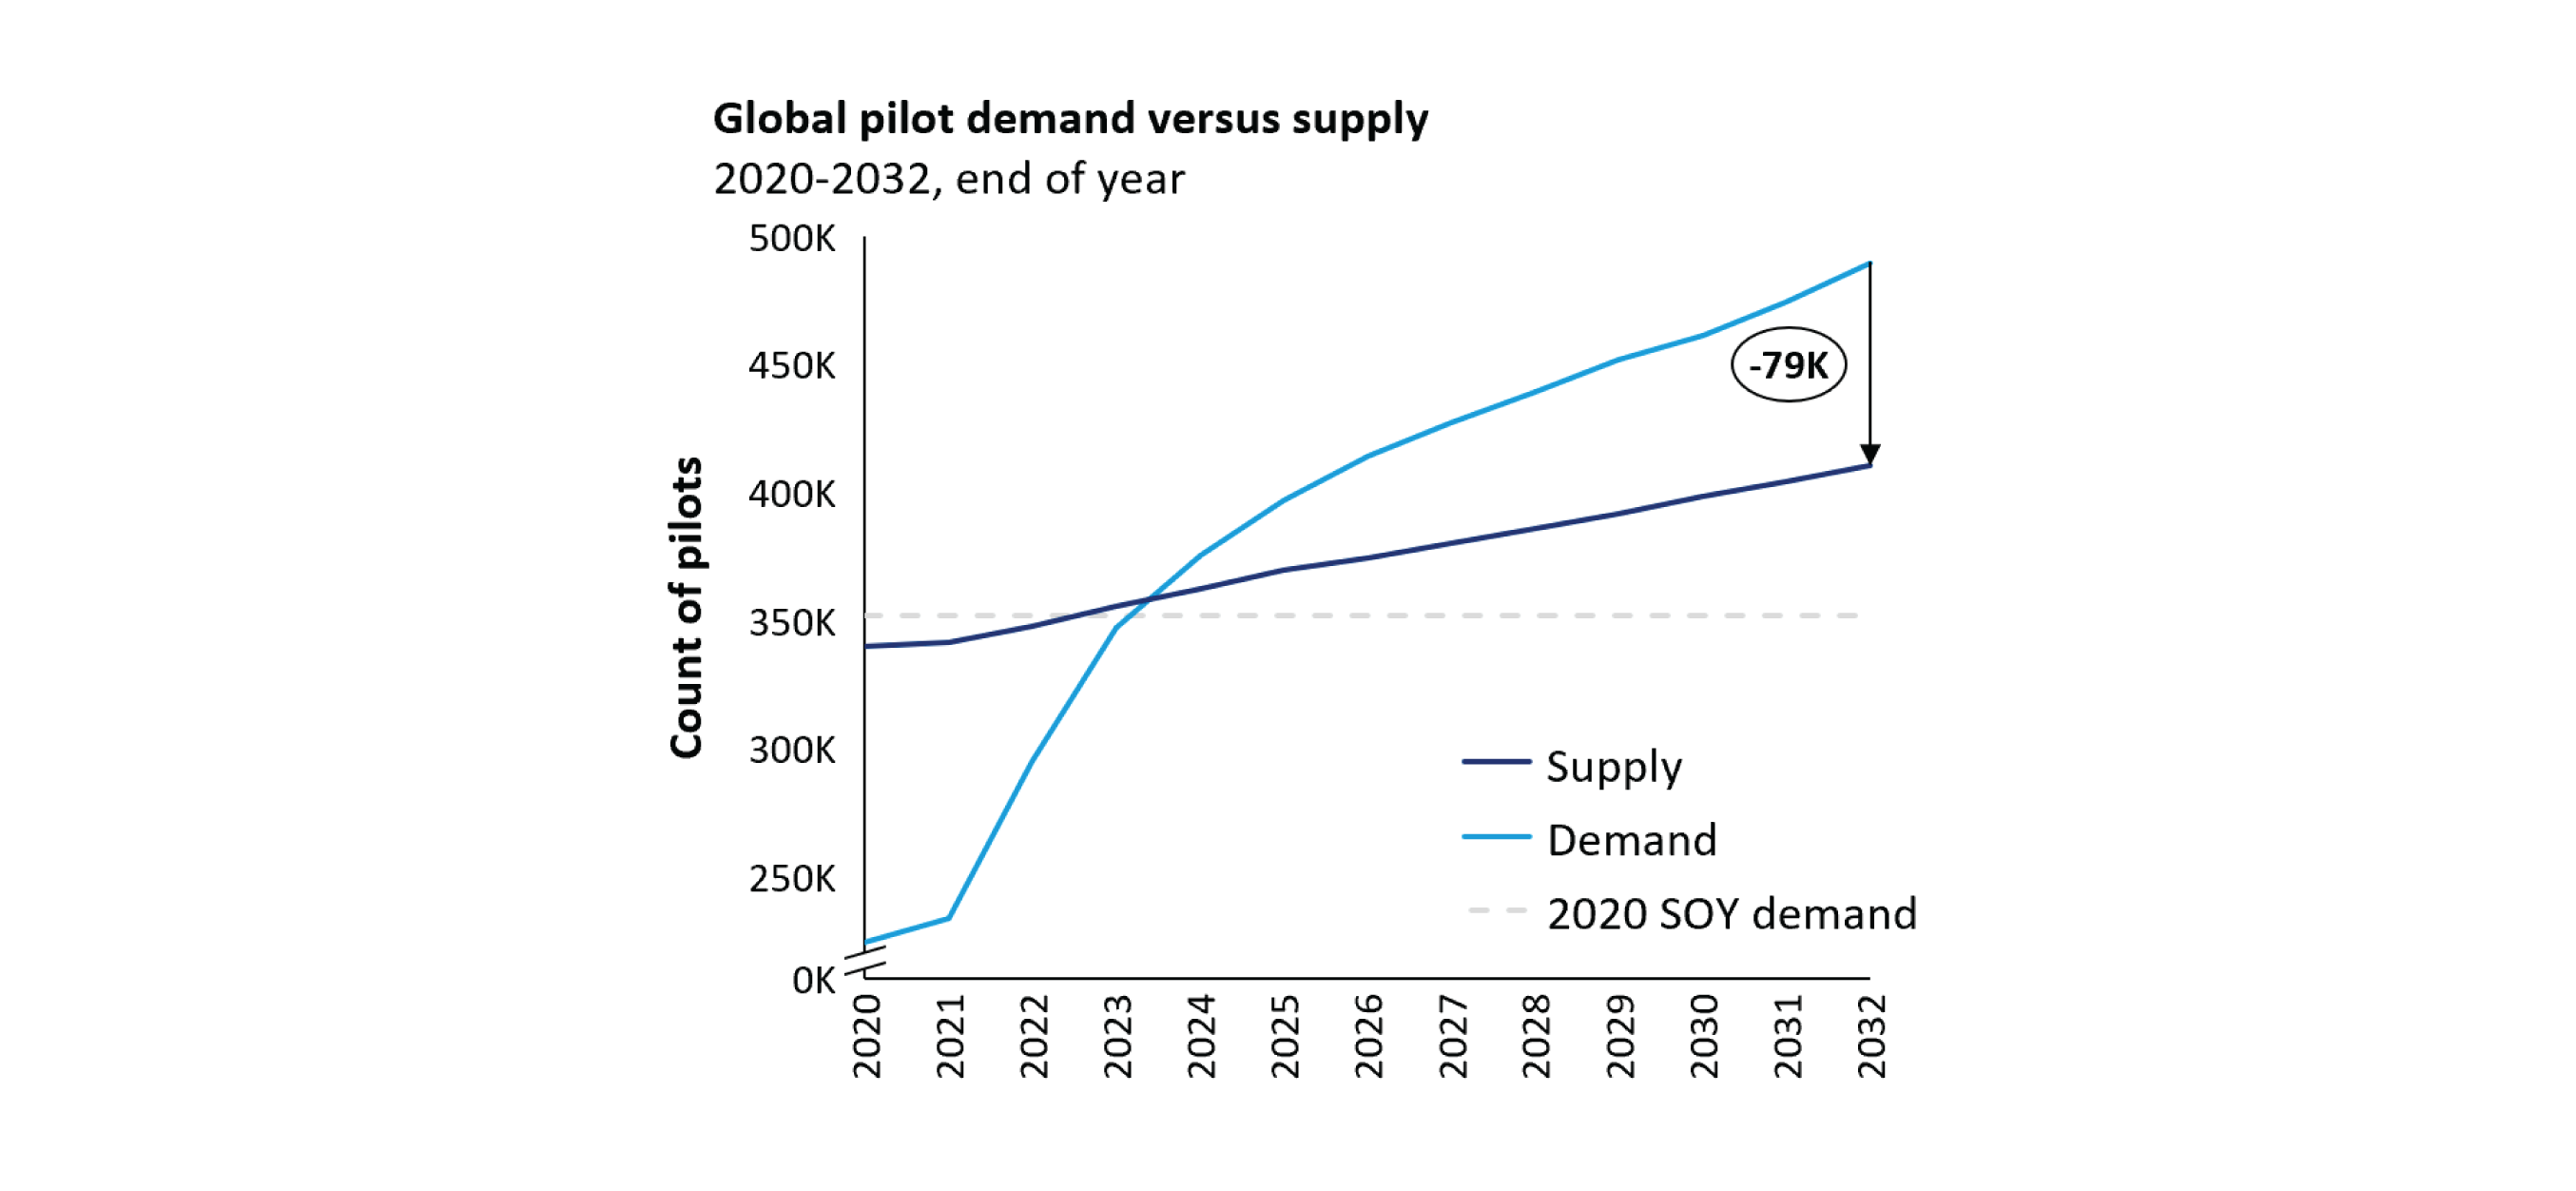 ‘The Airline Pilot Shortage Will Get Worse’ Oliver Wyman, Global